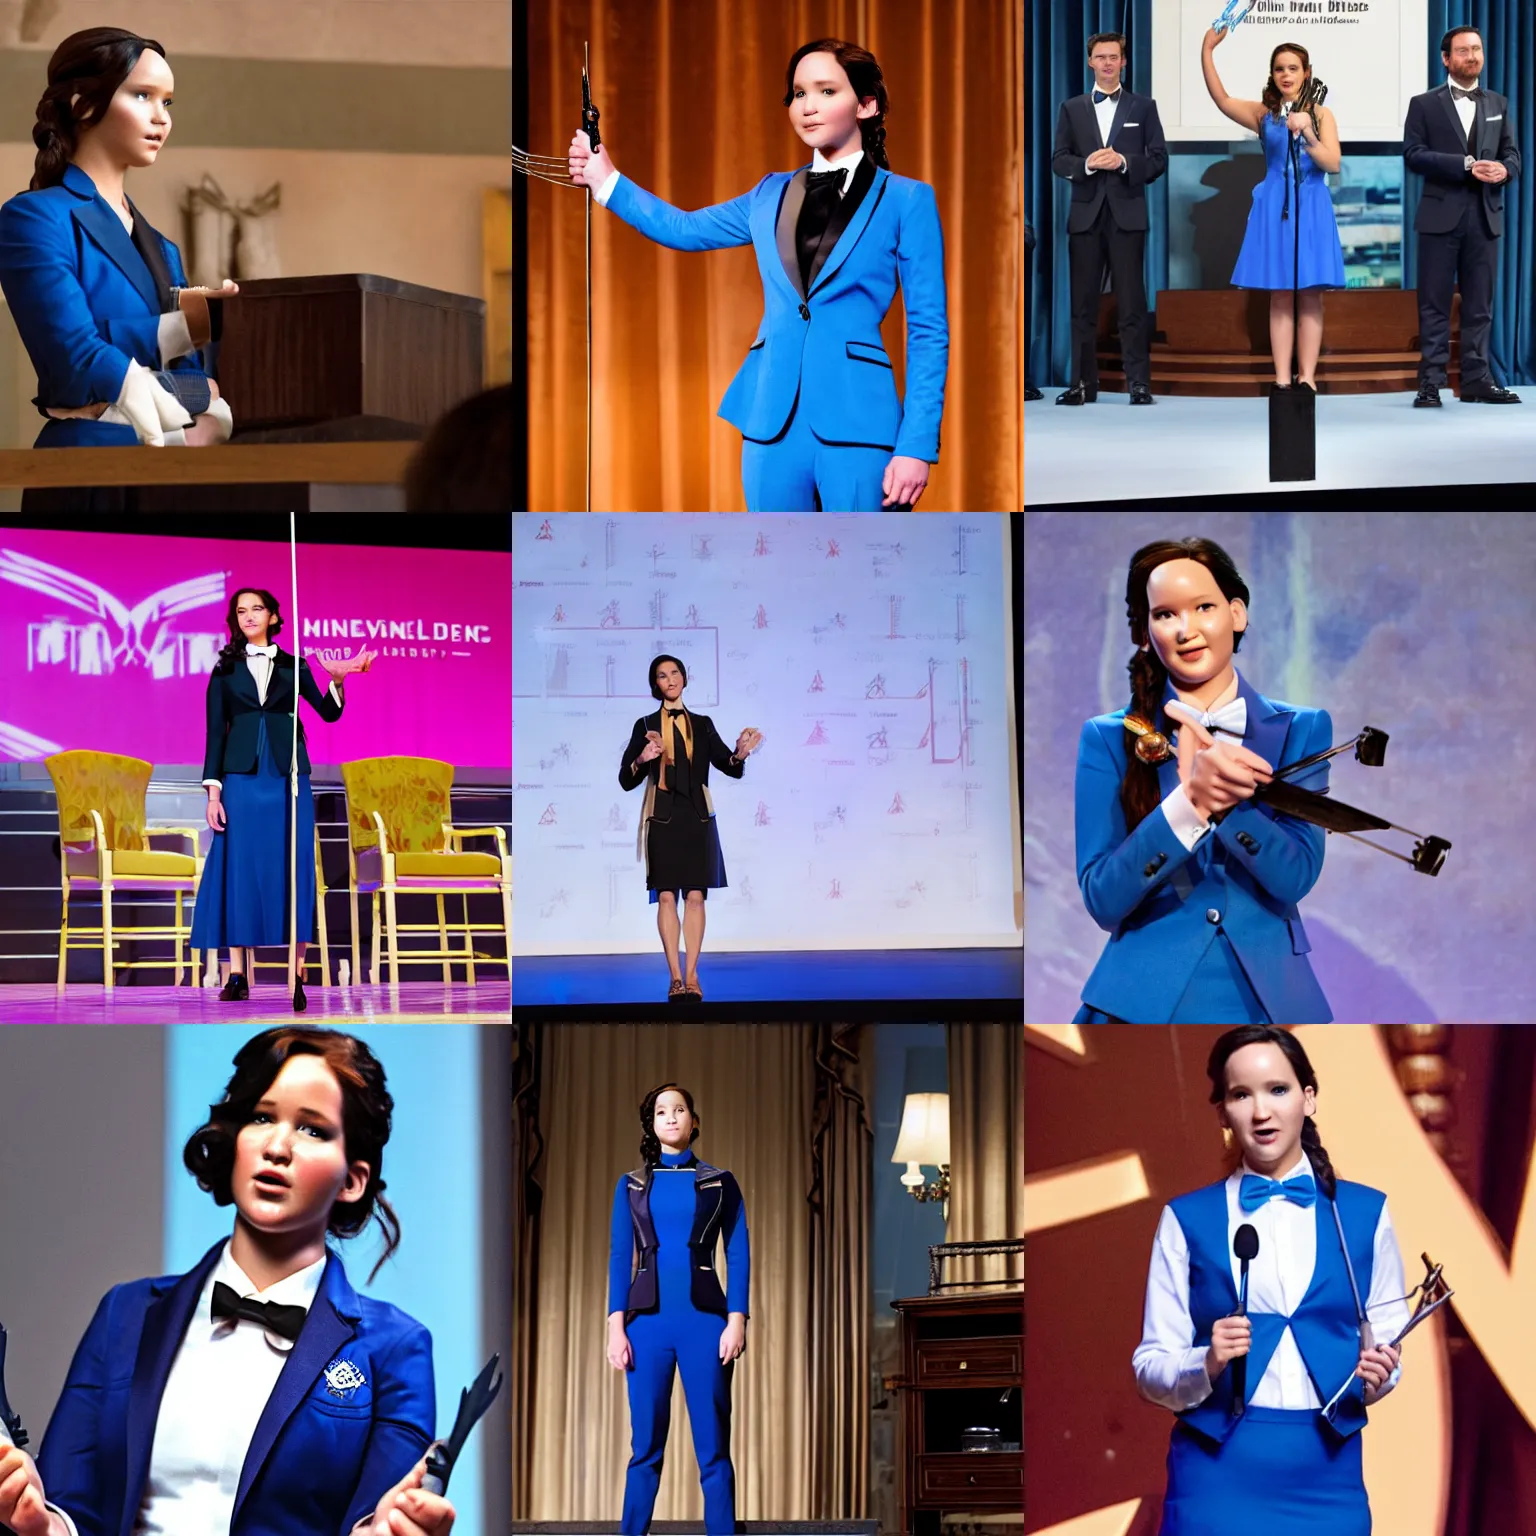 Prompt: Katniss Everdeen wearing a blue tuxedo, bow tie and skirt, as a billionaire CEO, presenting on stage